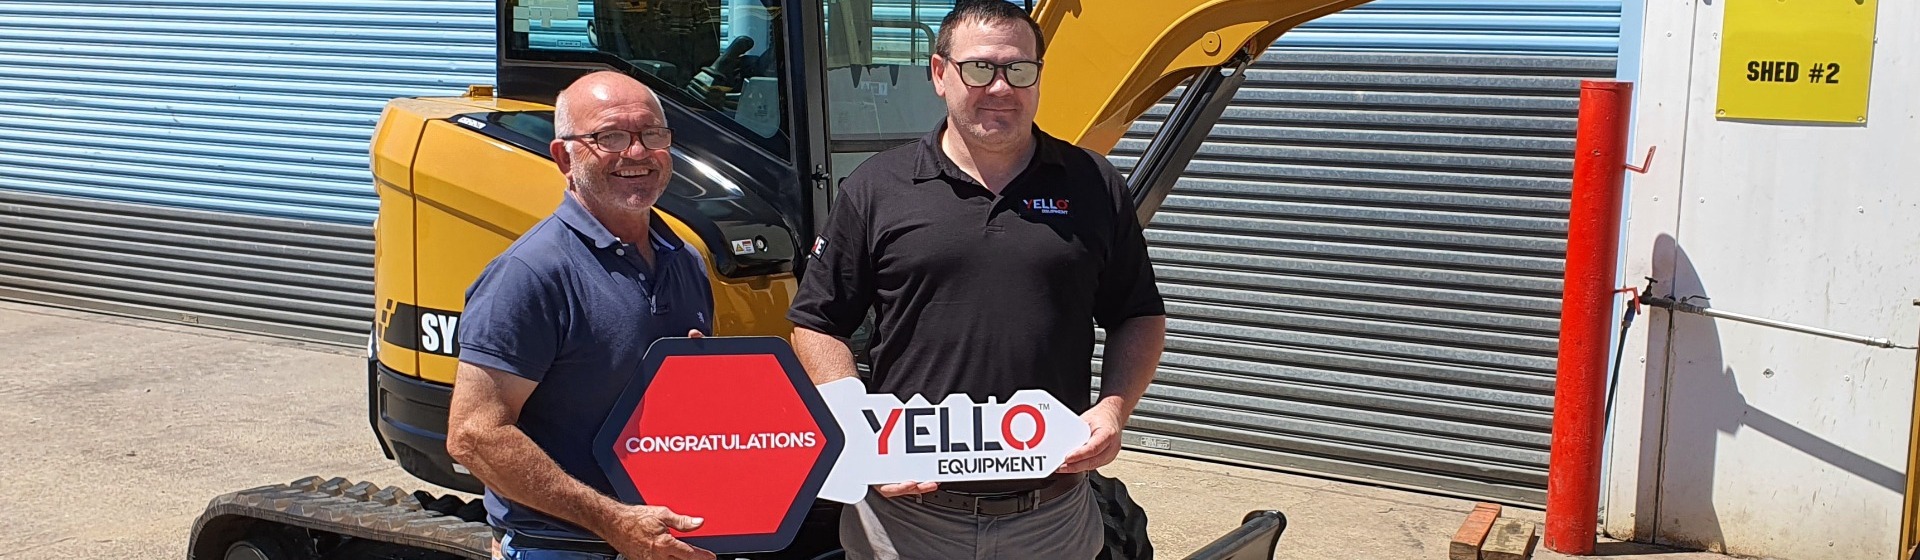 FIRST YELLO EQUIPMENT SALE IN NSW